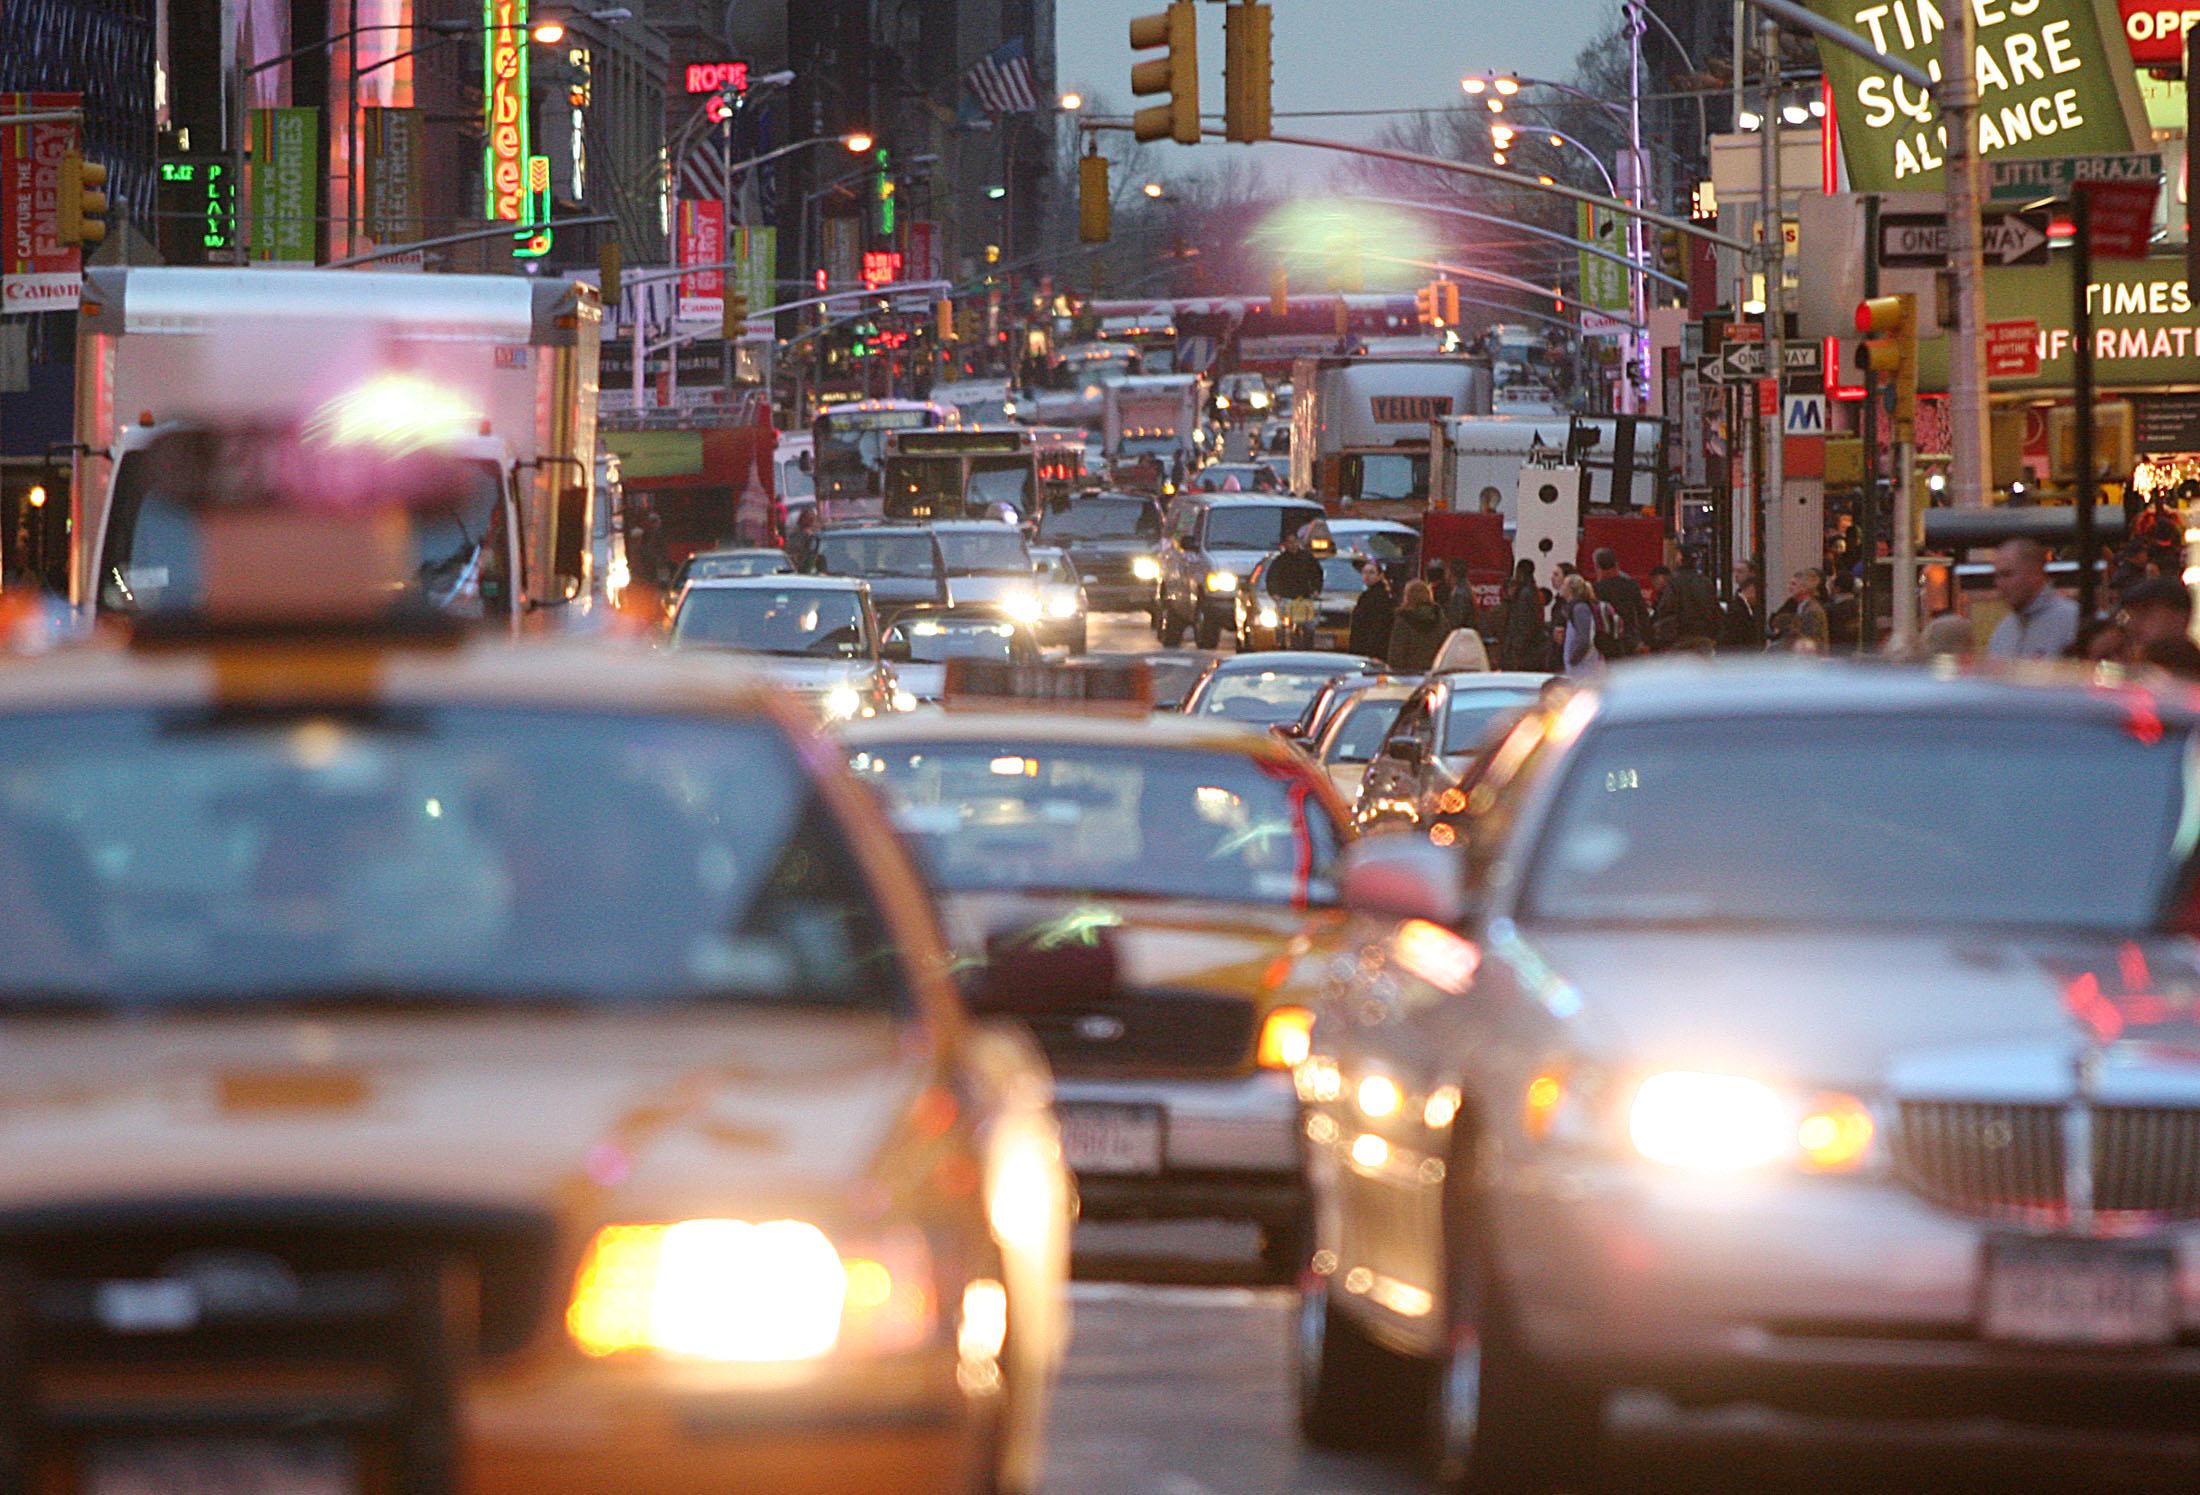 Cars squeeze into any space as they try to get though Time Square in new York City.